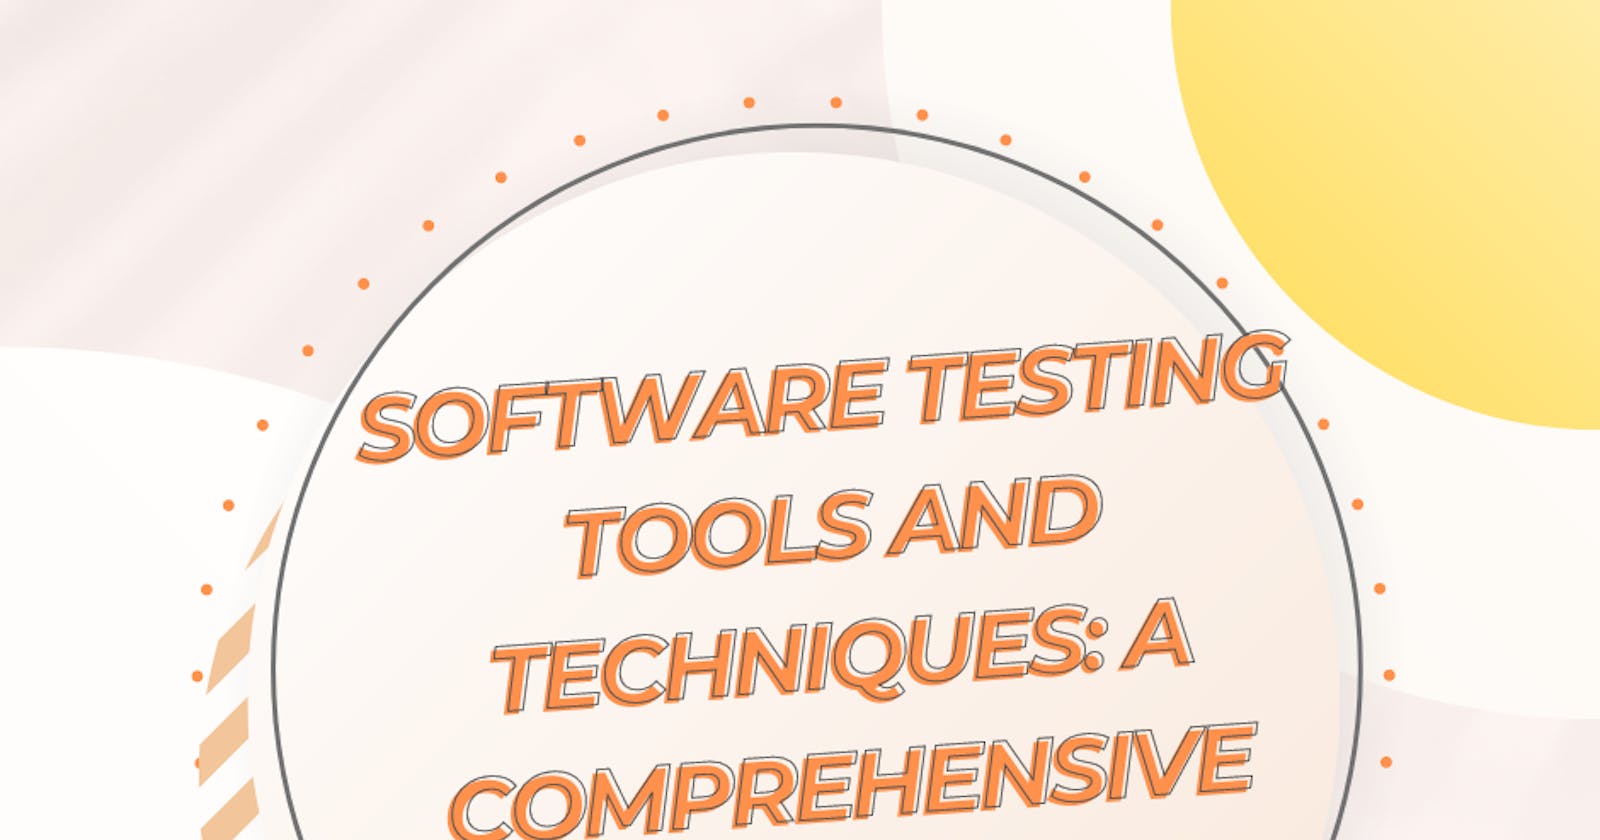 Software Testing Tools and Techniques: A Comprehensive Course